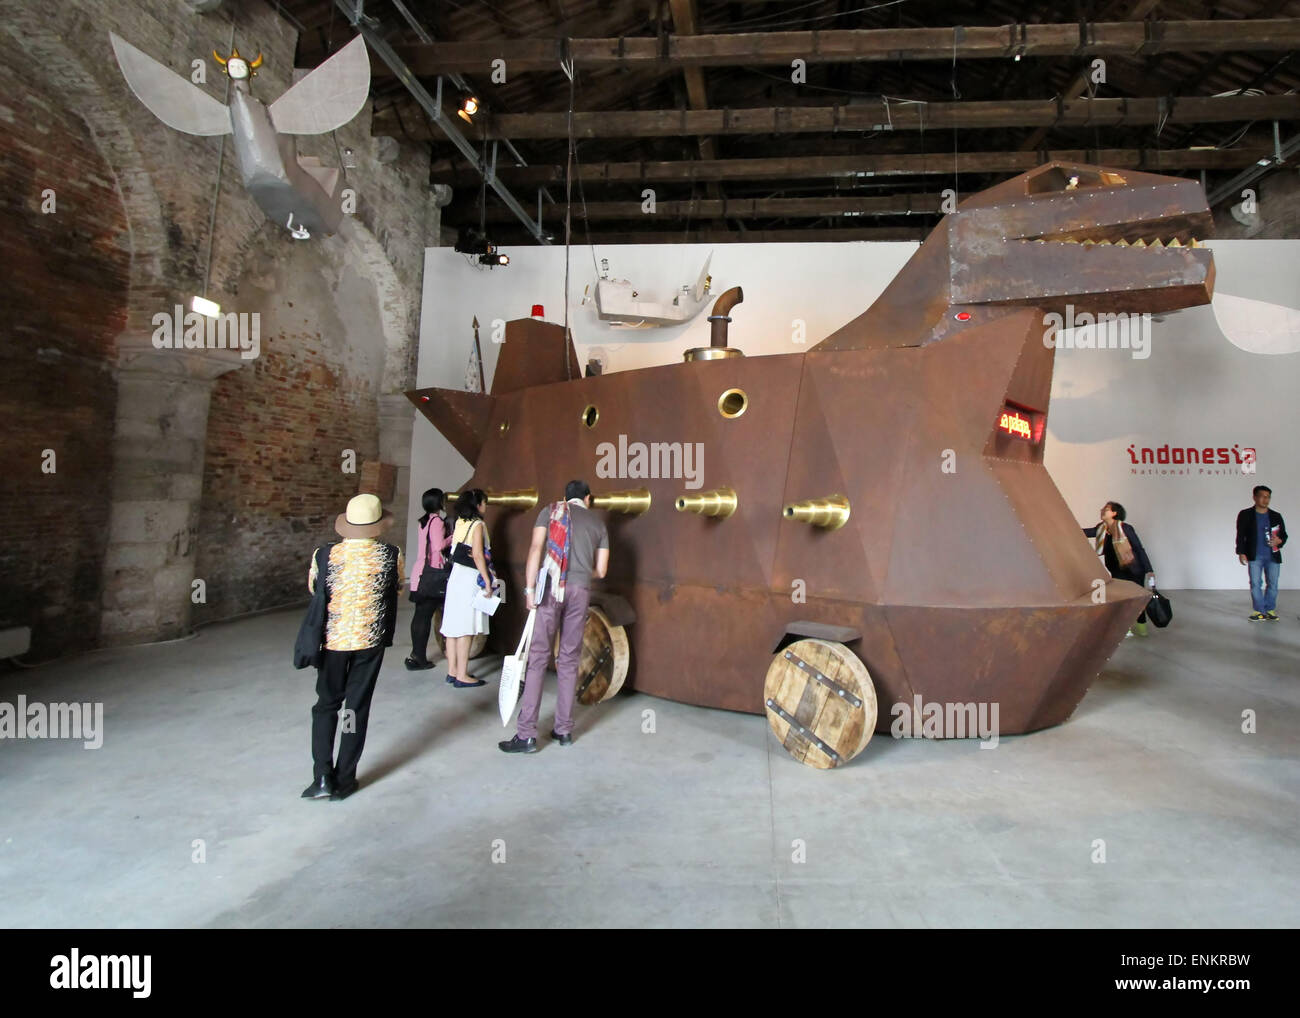 Venice, Italy. 6th May, 2015. A visitor looks at an installation by Indonesian artist Hory Dono nemed 'Voyage Trakomod' at the pavilion of Indonesia during the 56th International Art Exhibition (Biennale d'Arte) titled 'All the World's Futures' on May 6, 2015 in Venice Credit:  Andrea Spinelli/Alamy Live News Stock Photo